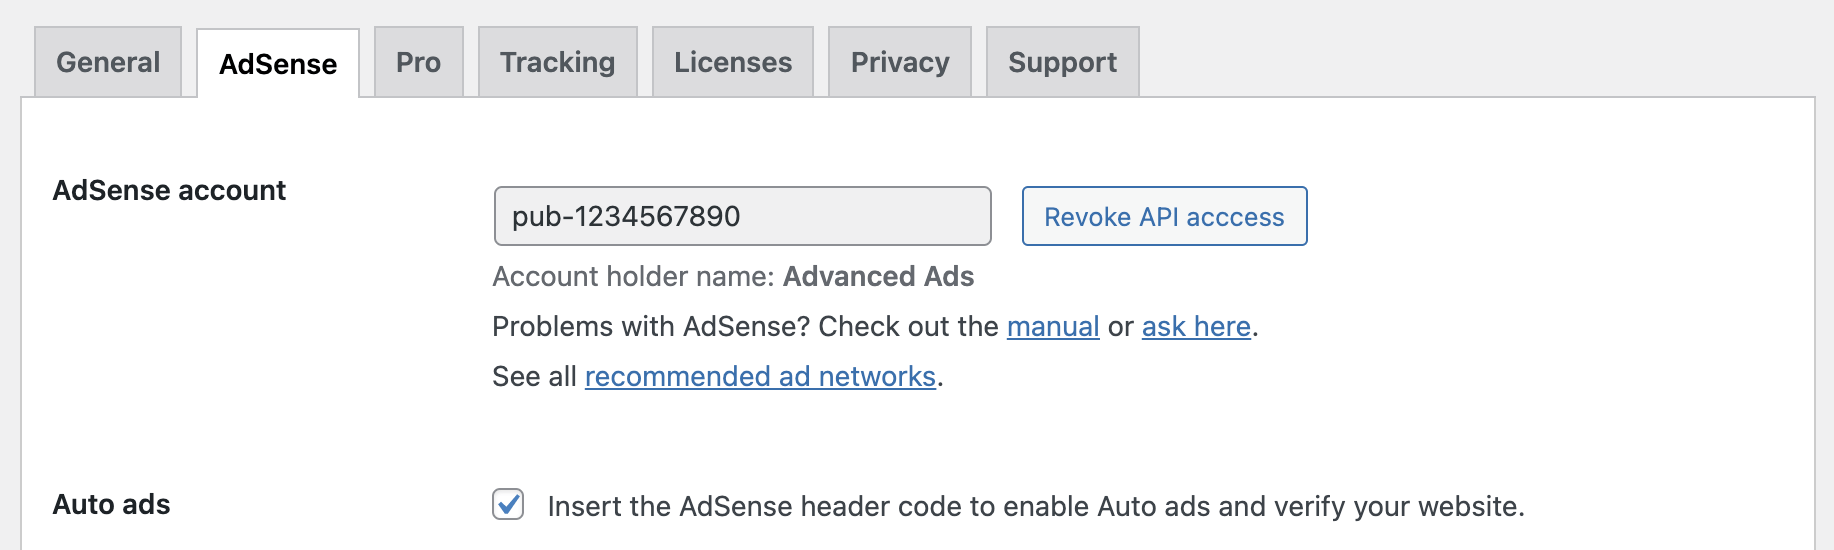 Options to embed Google AdSense auto ads with the Advanced Ads plugin